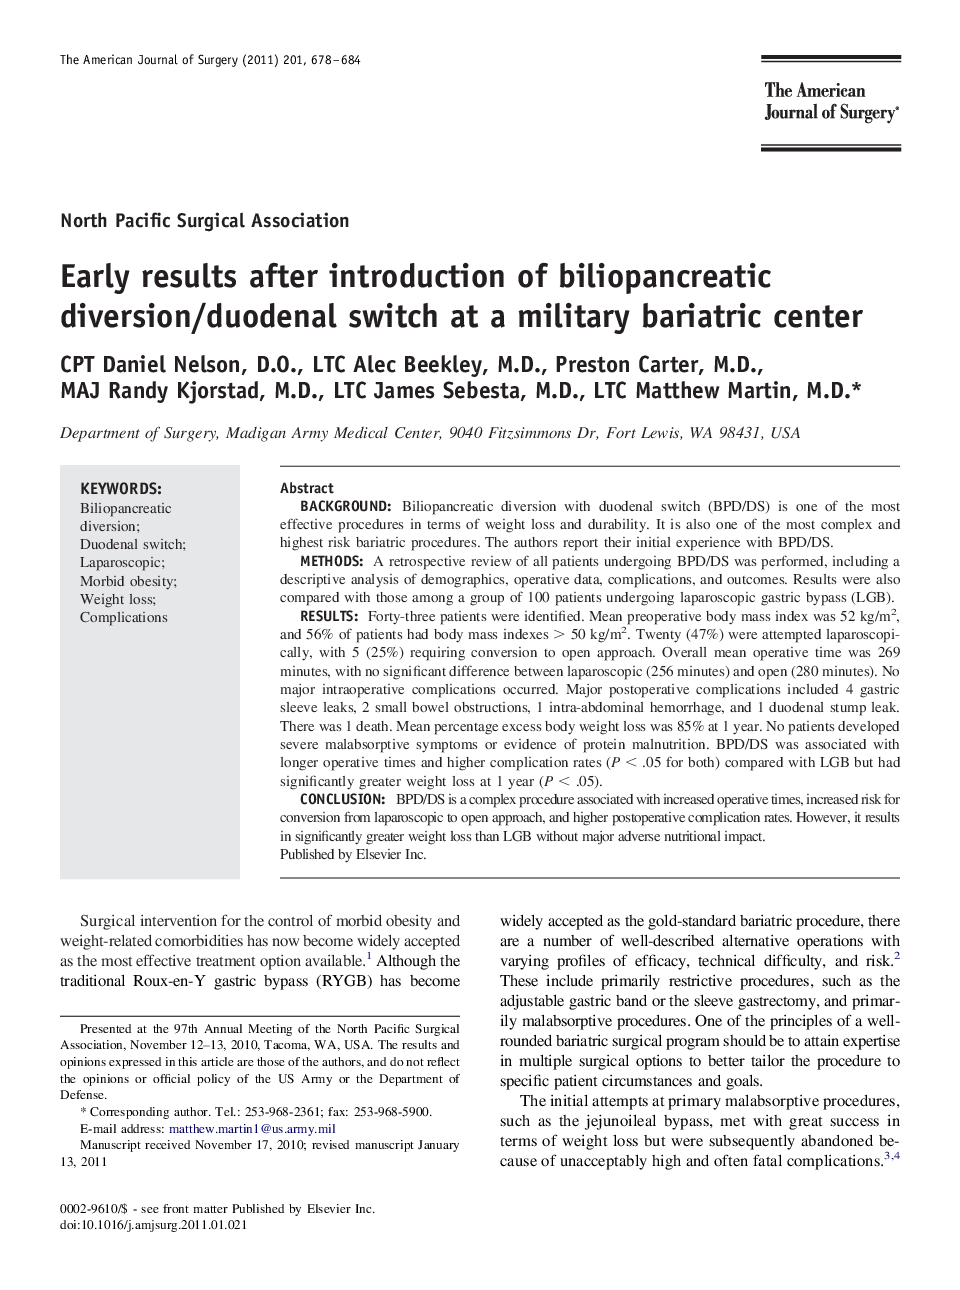 Early results after introduction of biliopancreatic diversion/duodenal switch at a military bariatric center 